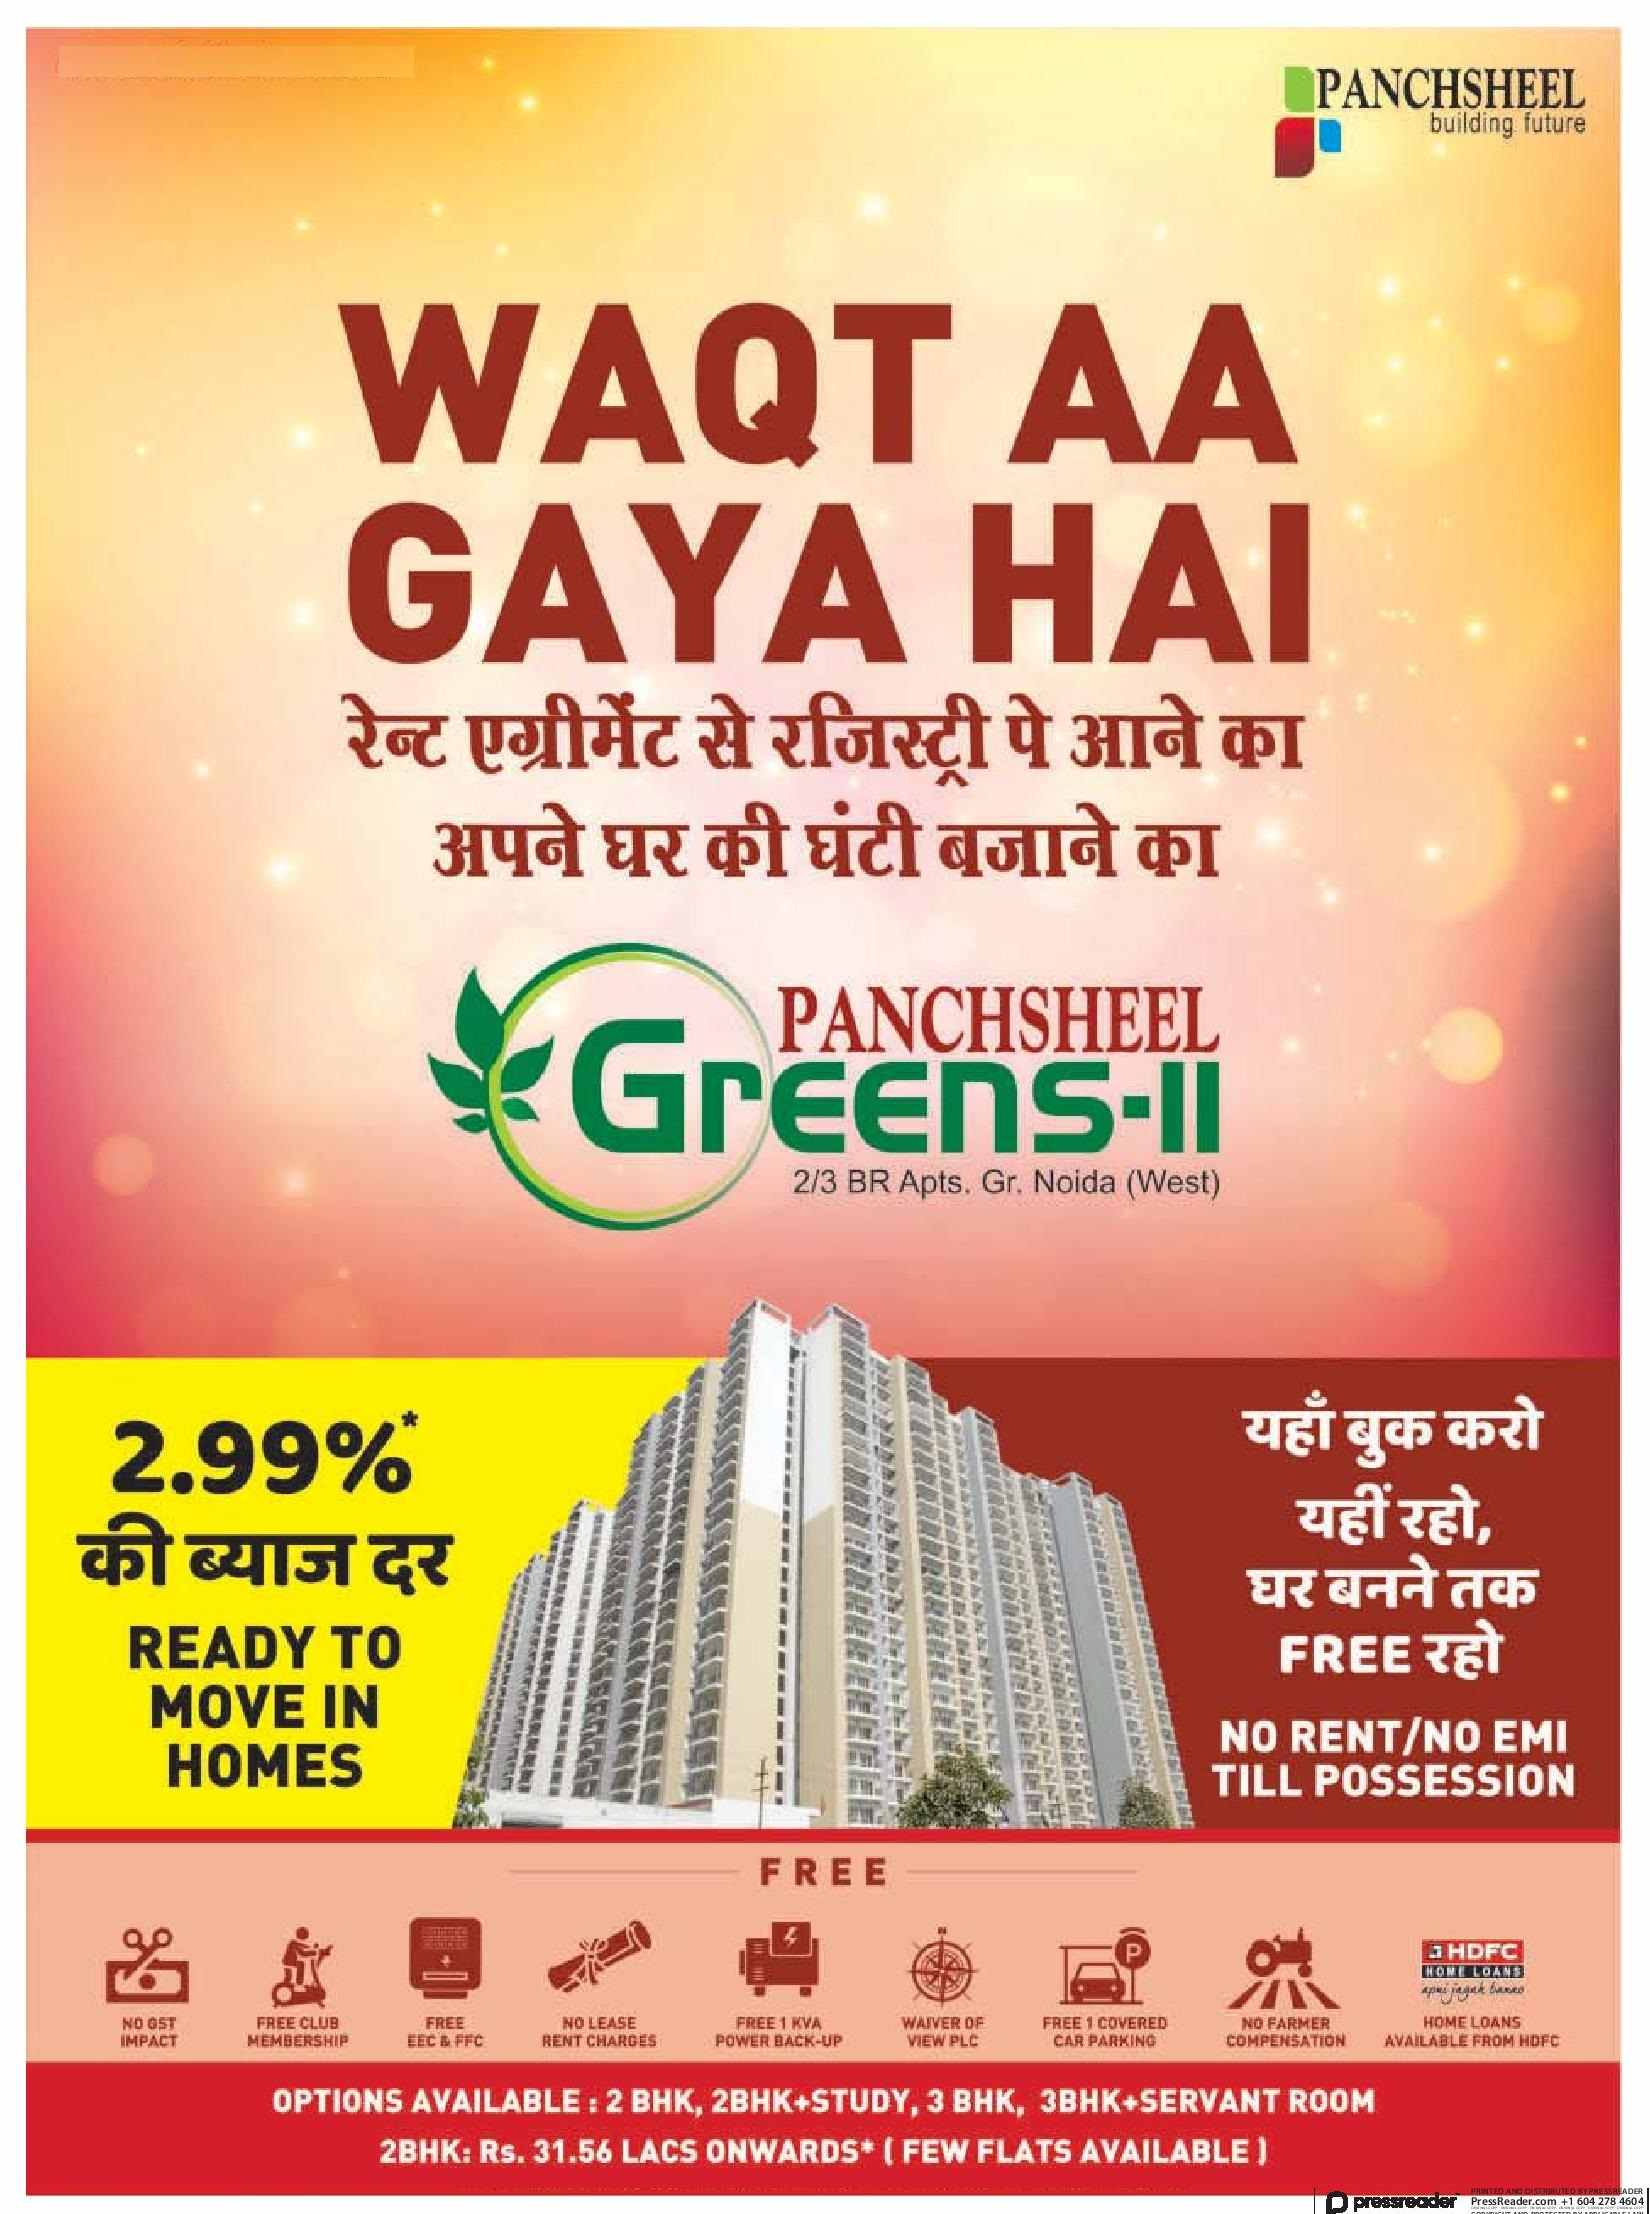 Pay no EMI & rent till possession at Panchsheel Greens II in Sector 16, Greater Noida Update